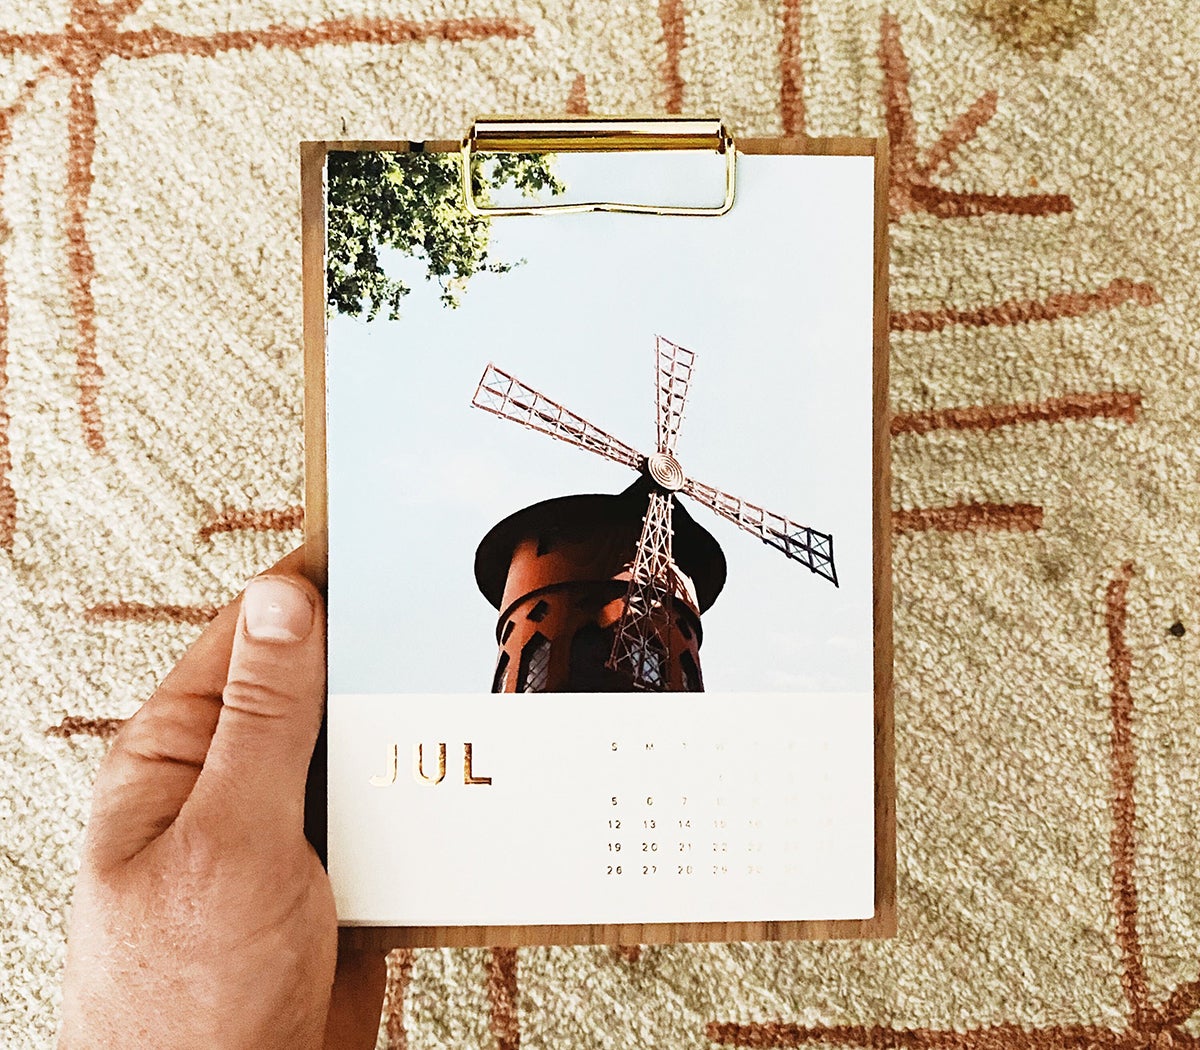 Photo by @b_brynestad of Artifact Uprising Walnut Desktop Calendar featuring photo of old time mill